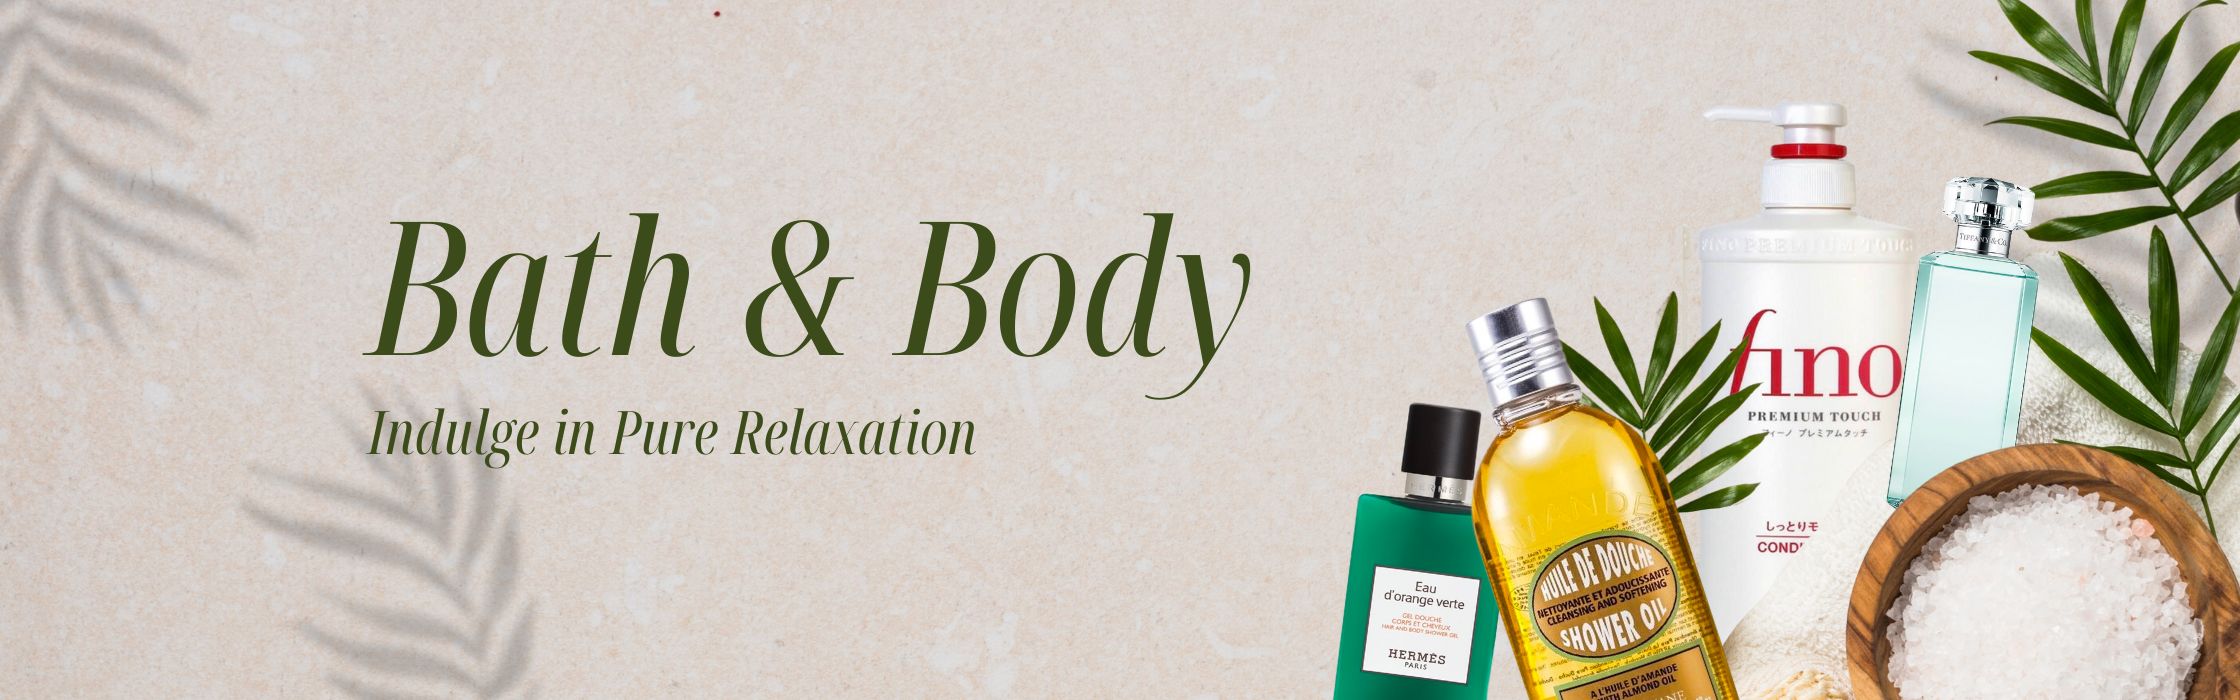 Bath and Body Banner